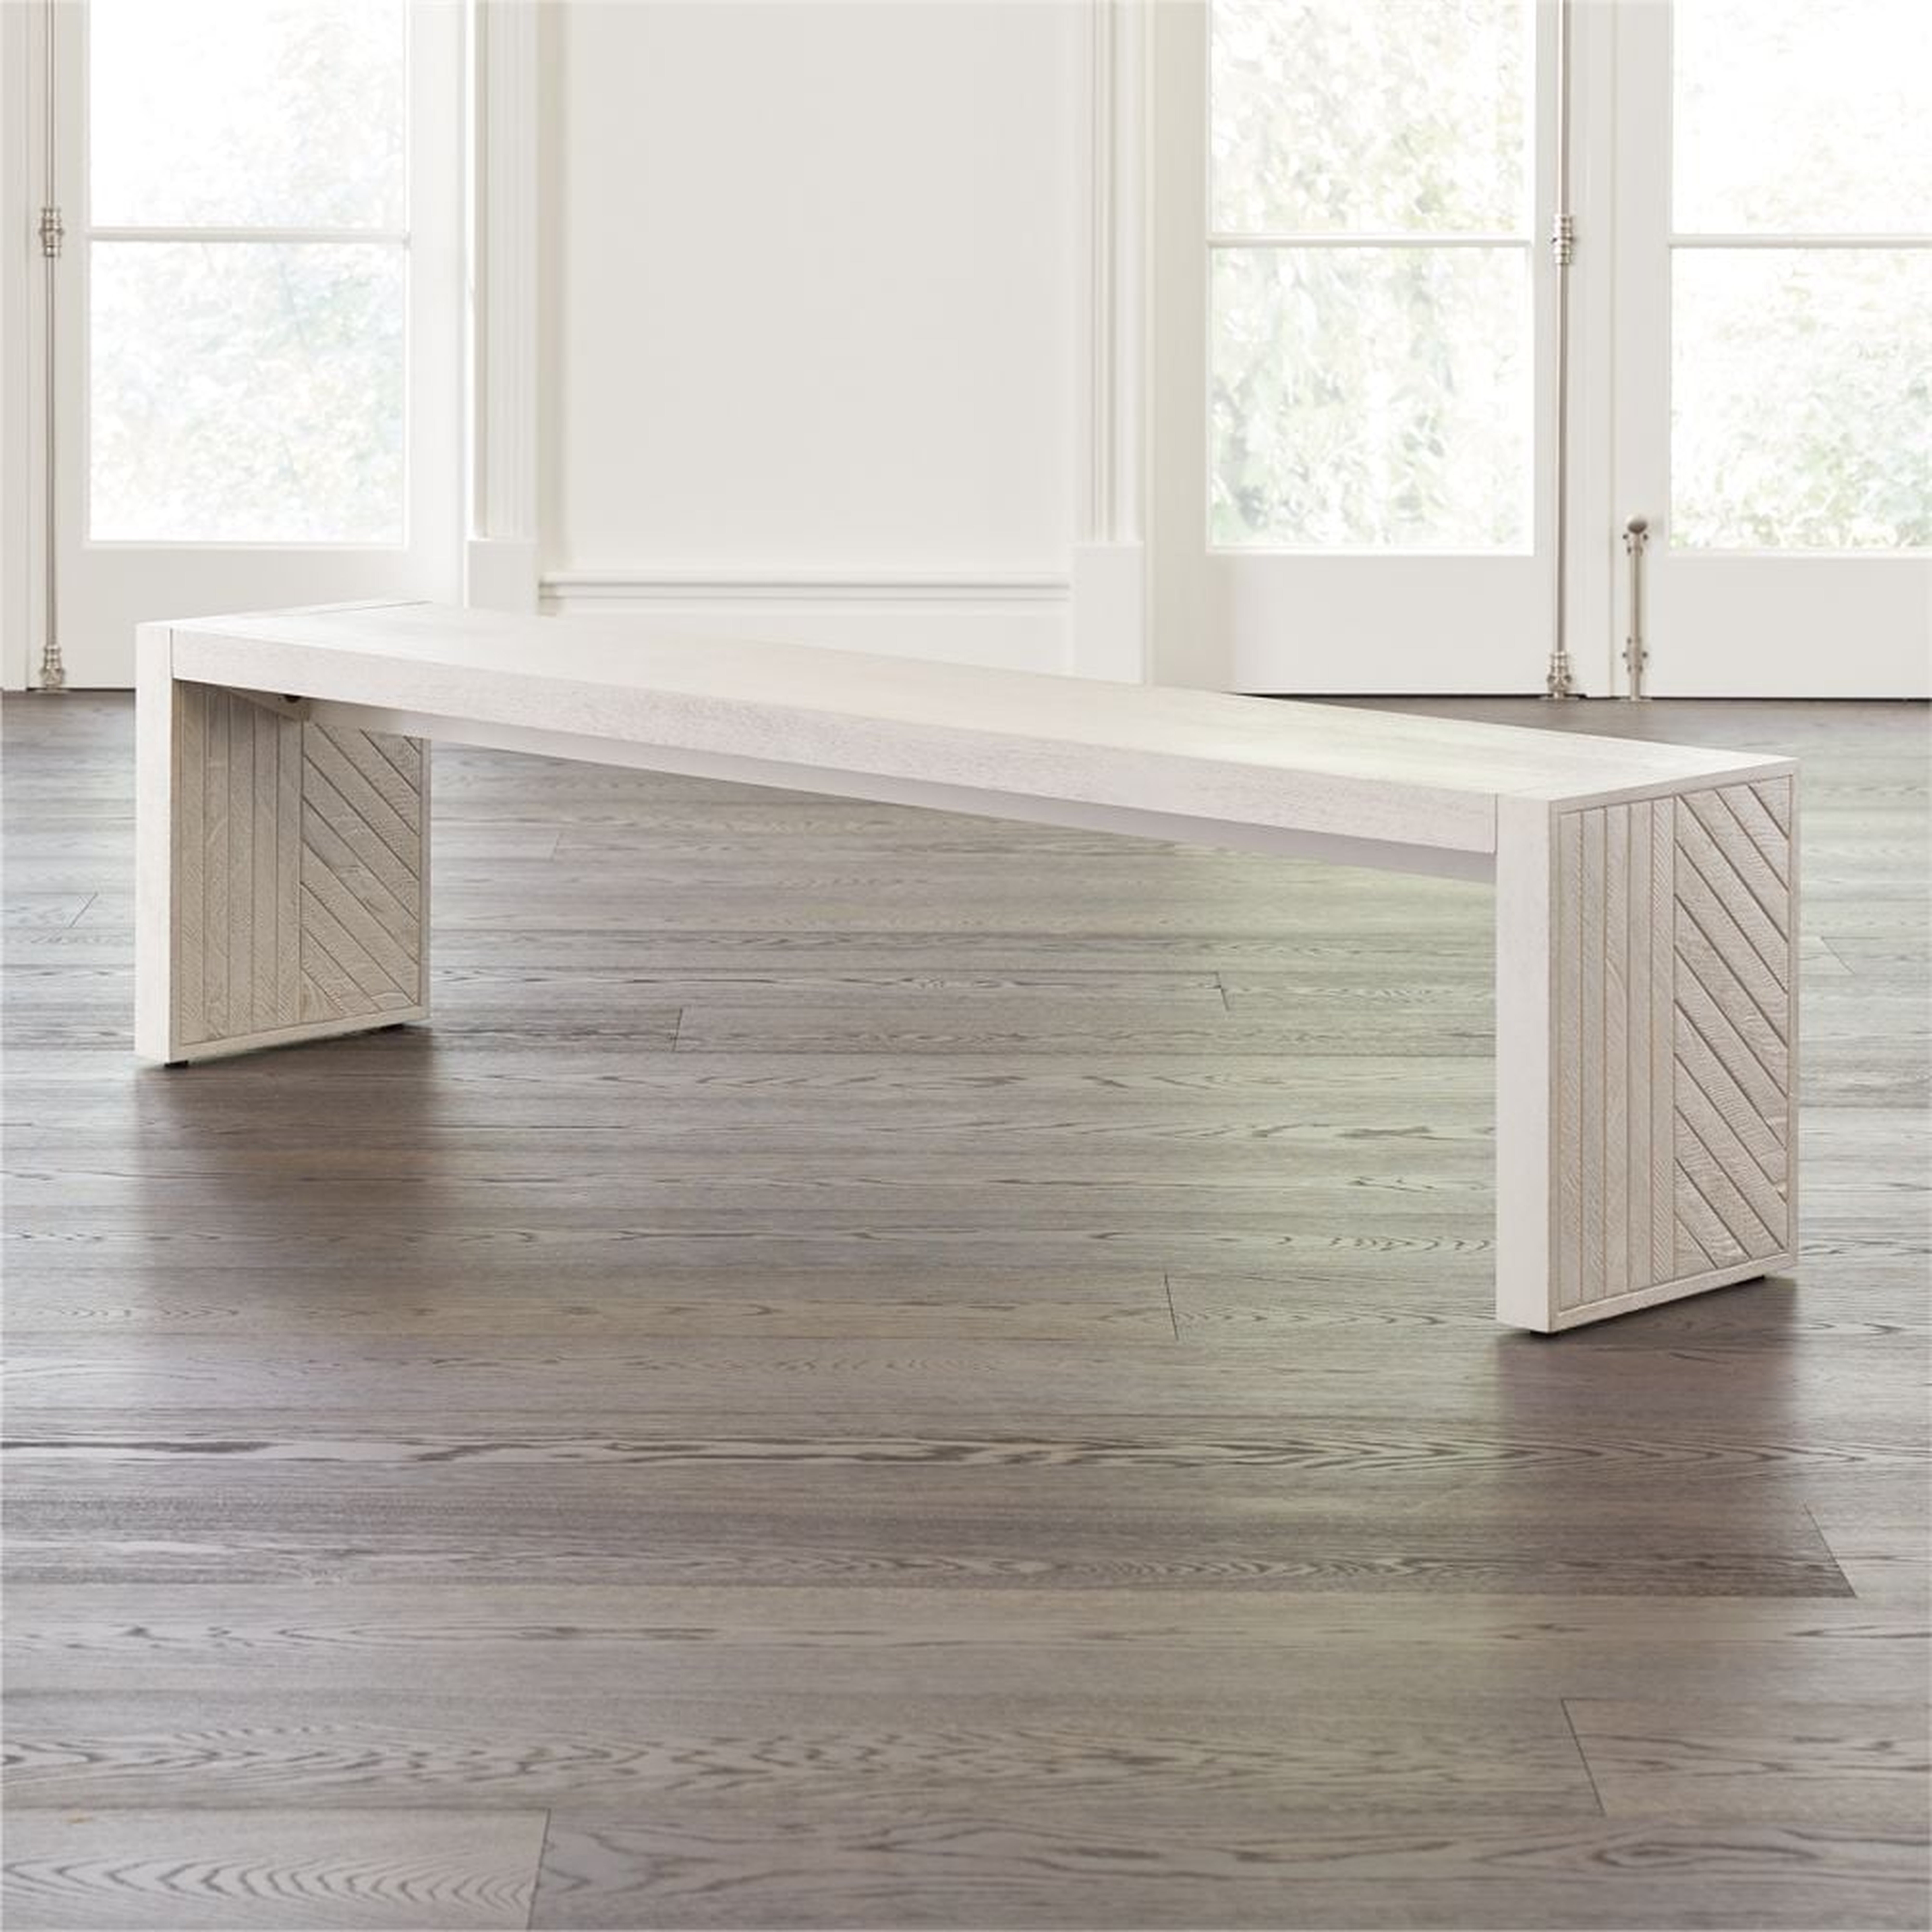 Dunewood Whitewashed Dining Bench - Crate and Barrel